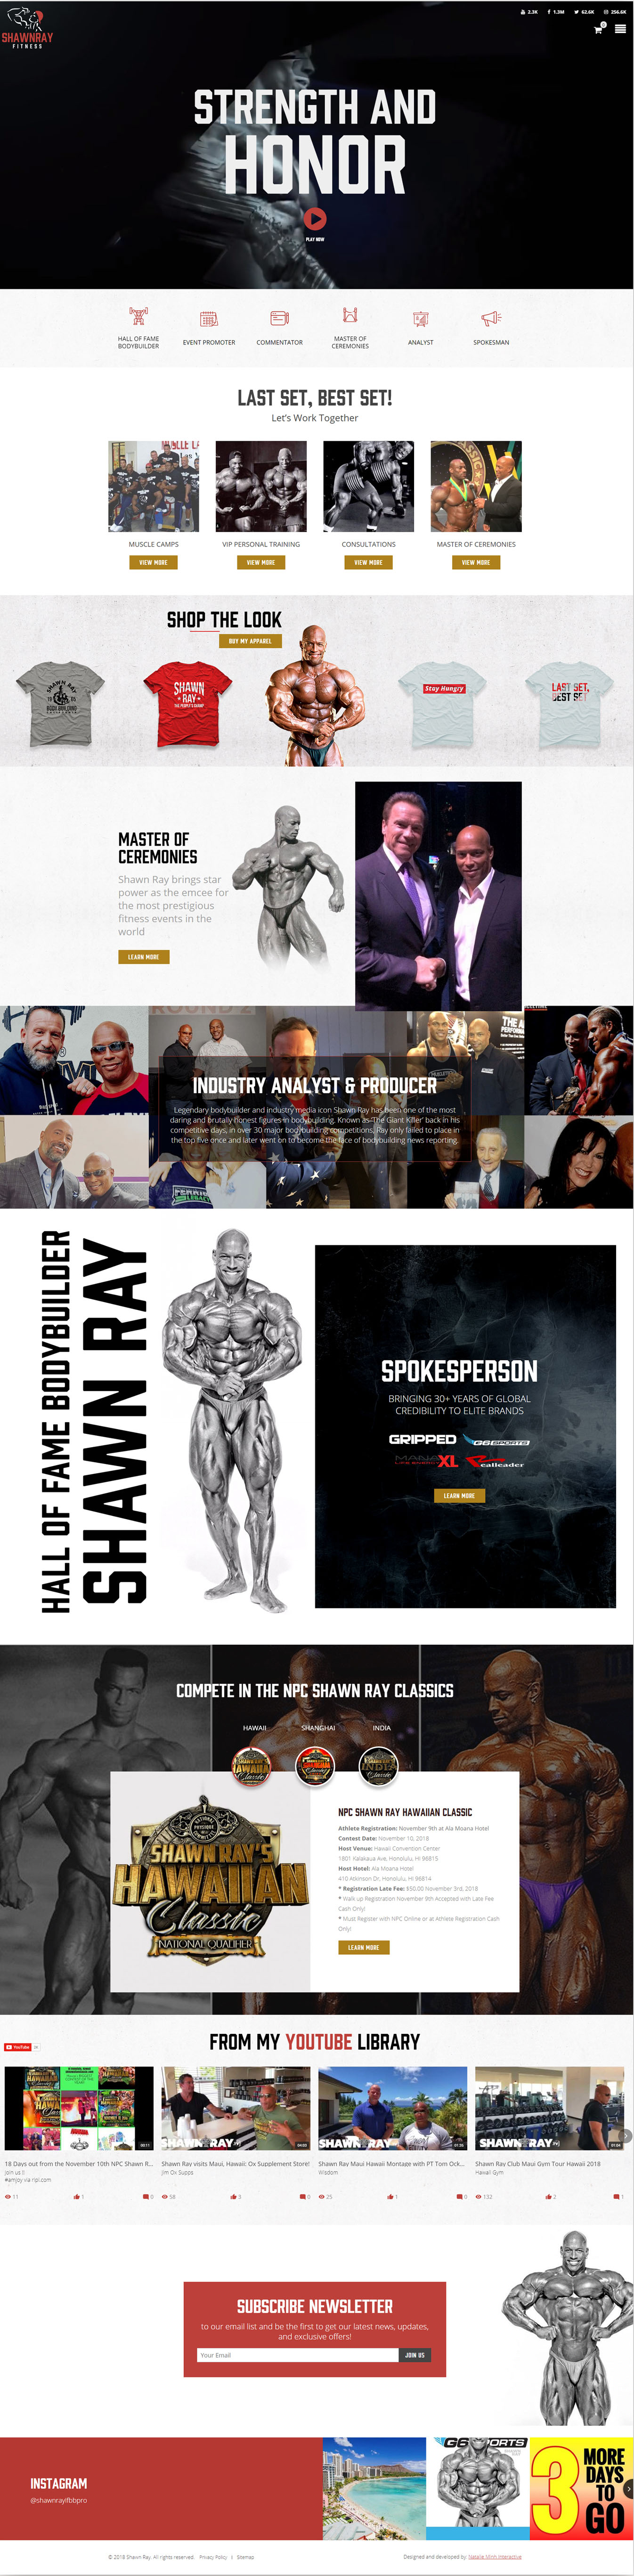 Shawn Ray Fitness Homepage